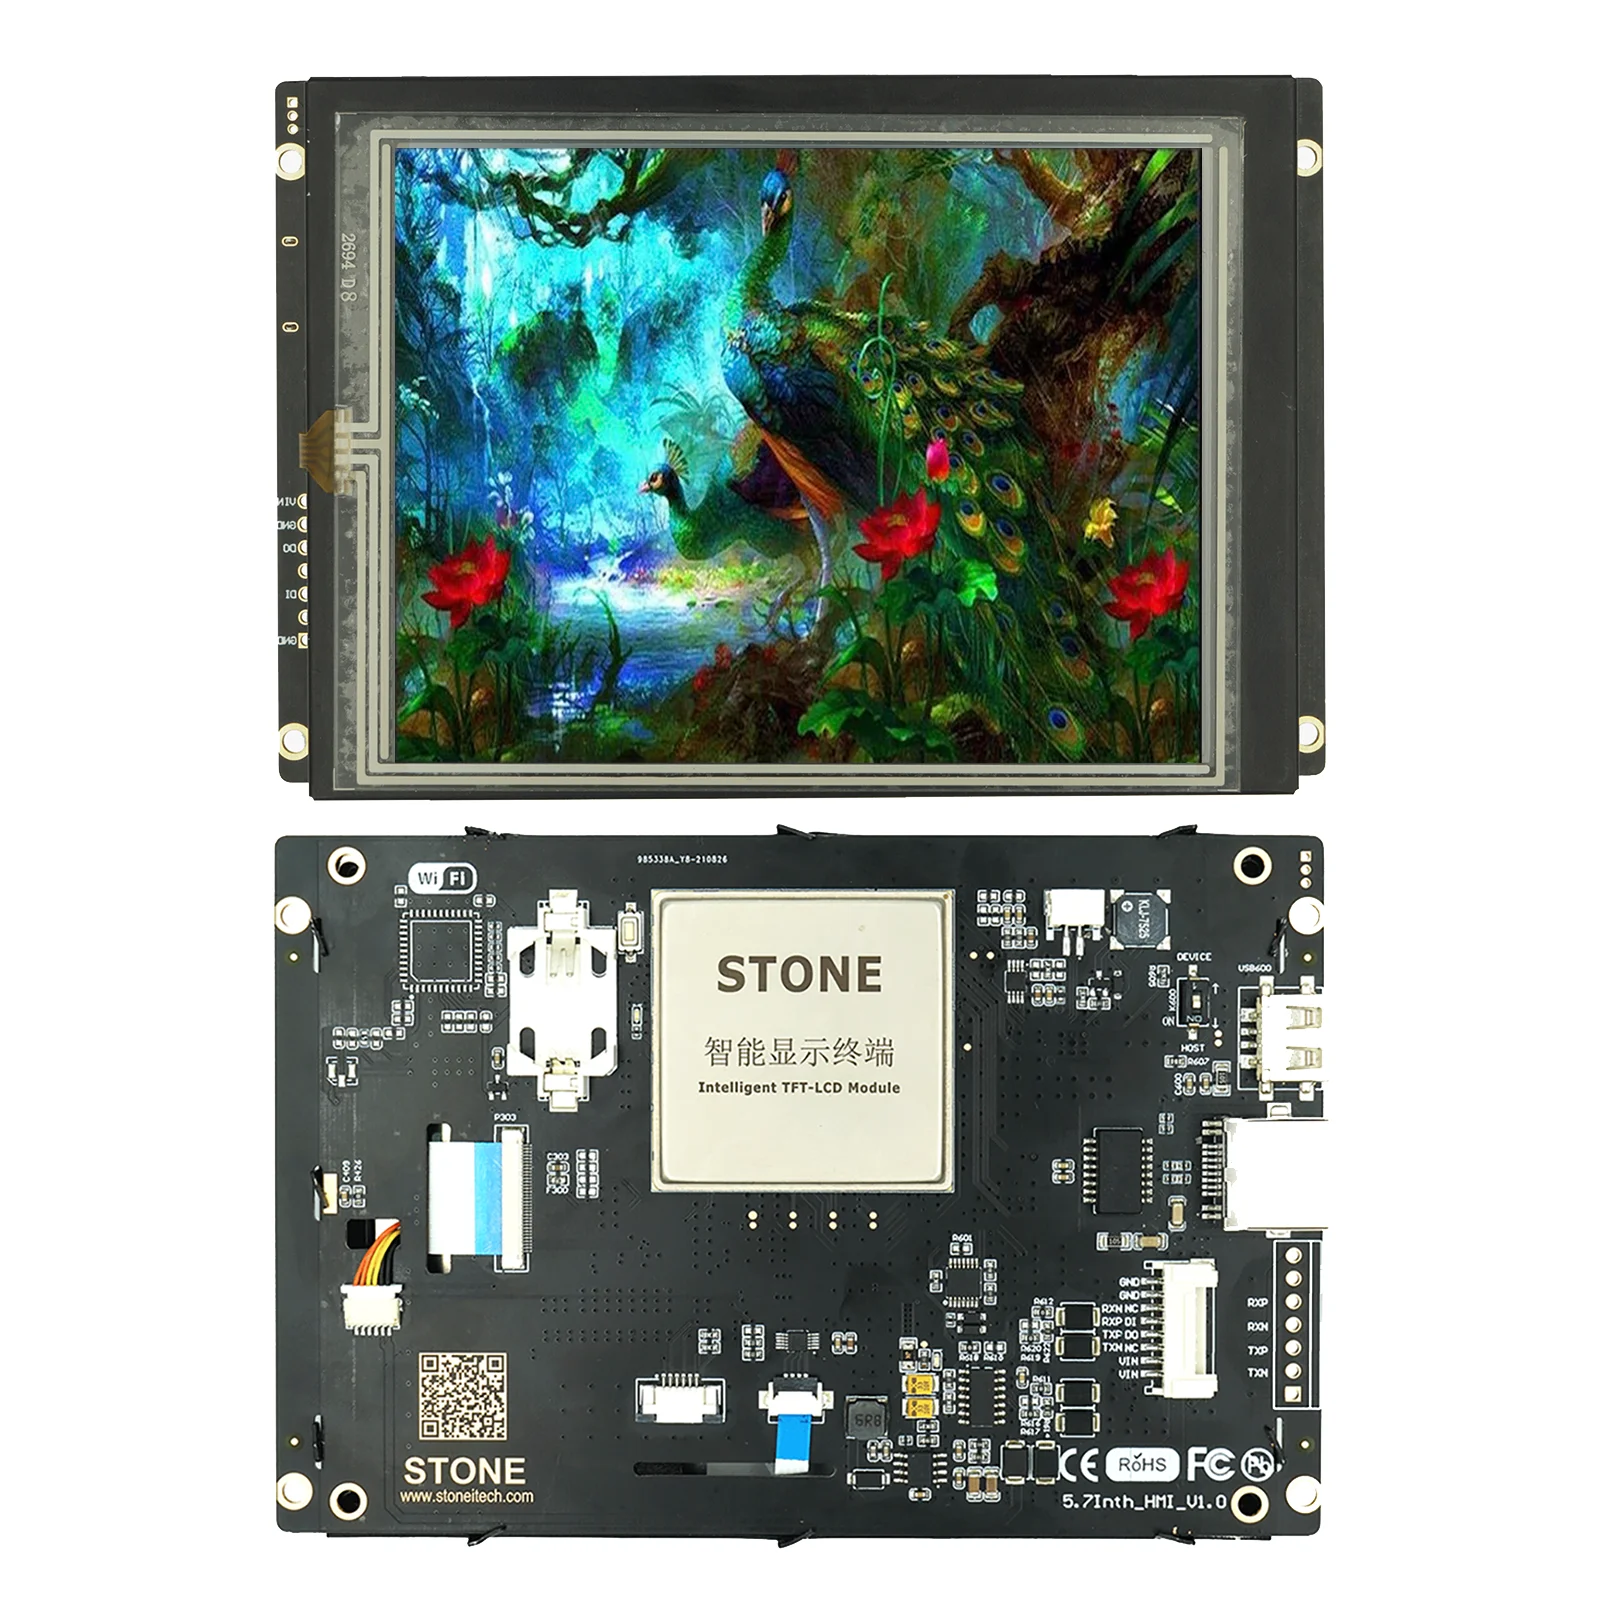 STONE Serial HMI Graphic LCD Display Module with Program Touch Screen for Equipment Control Panel+Software